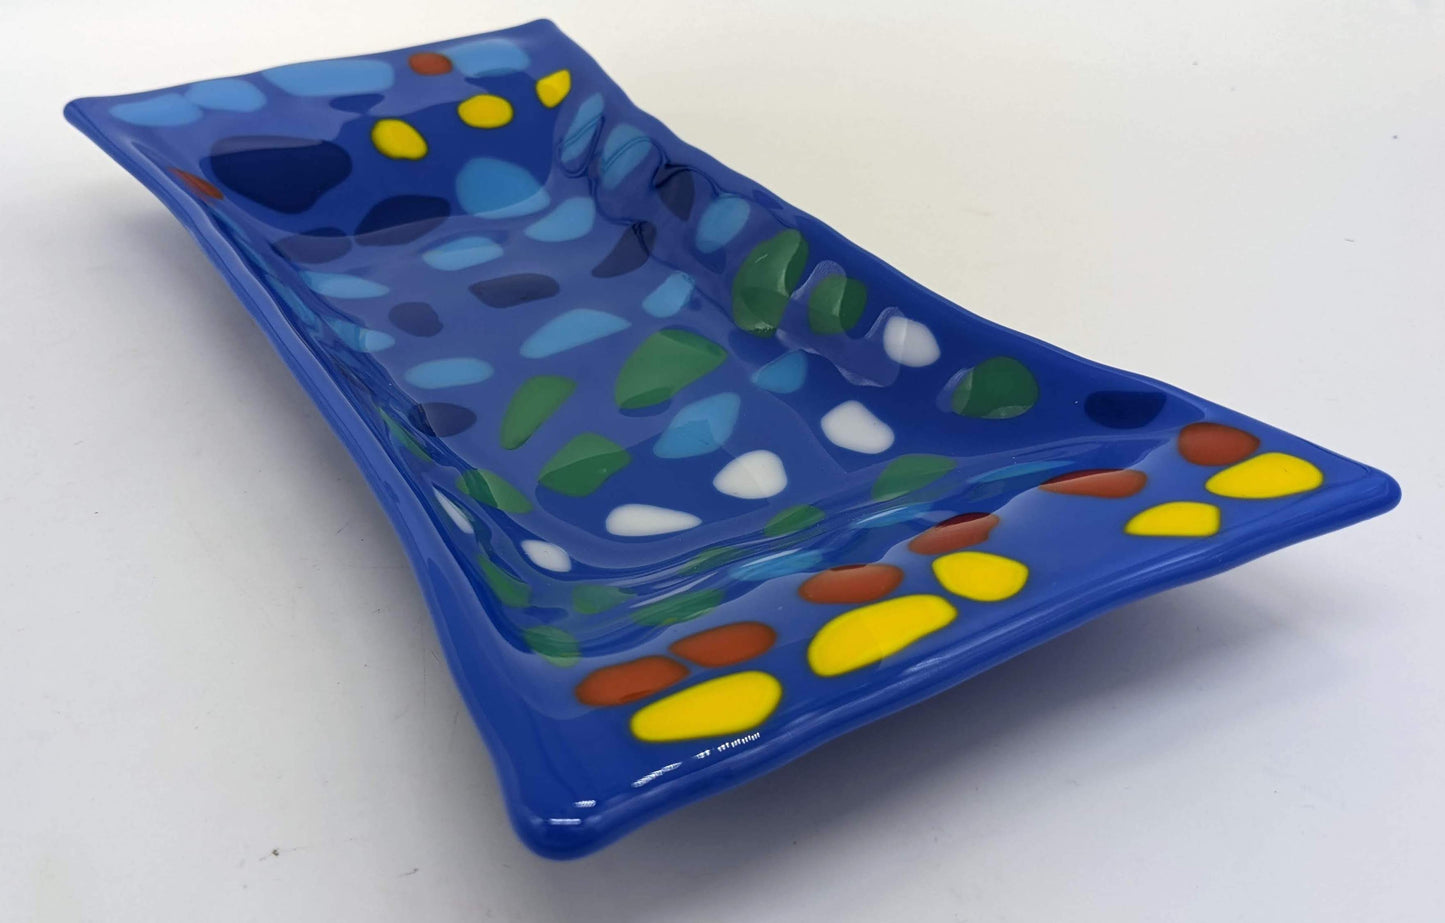 blue glass tray with rows of spots of yellow, white, red, blues, and green